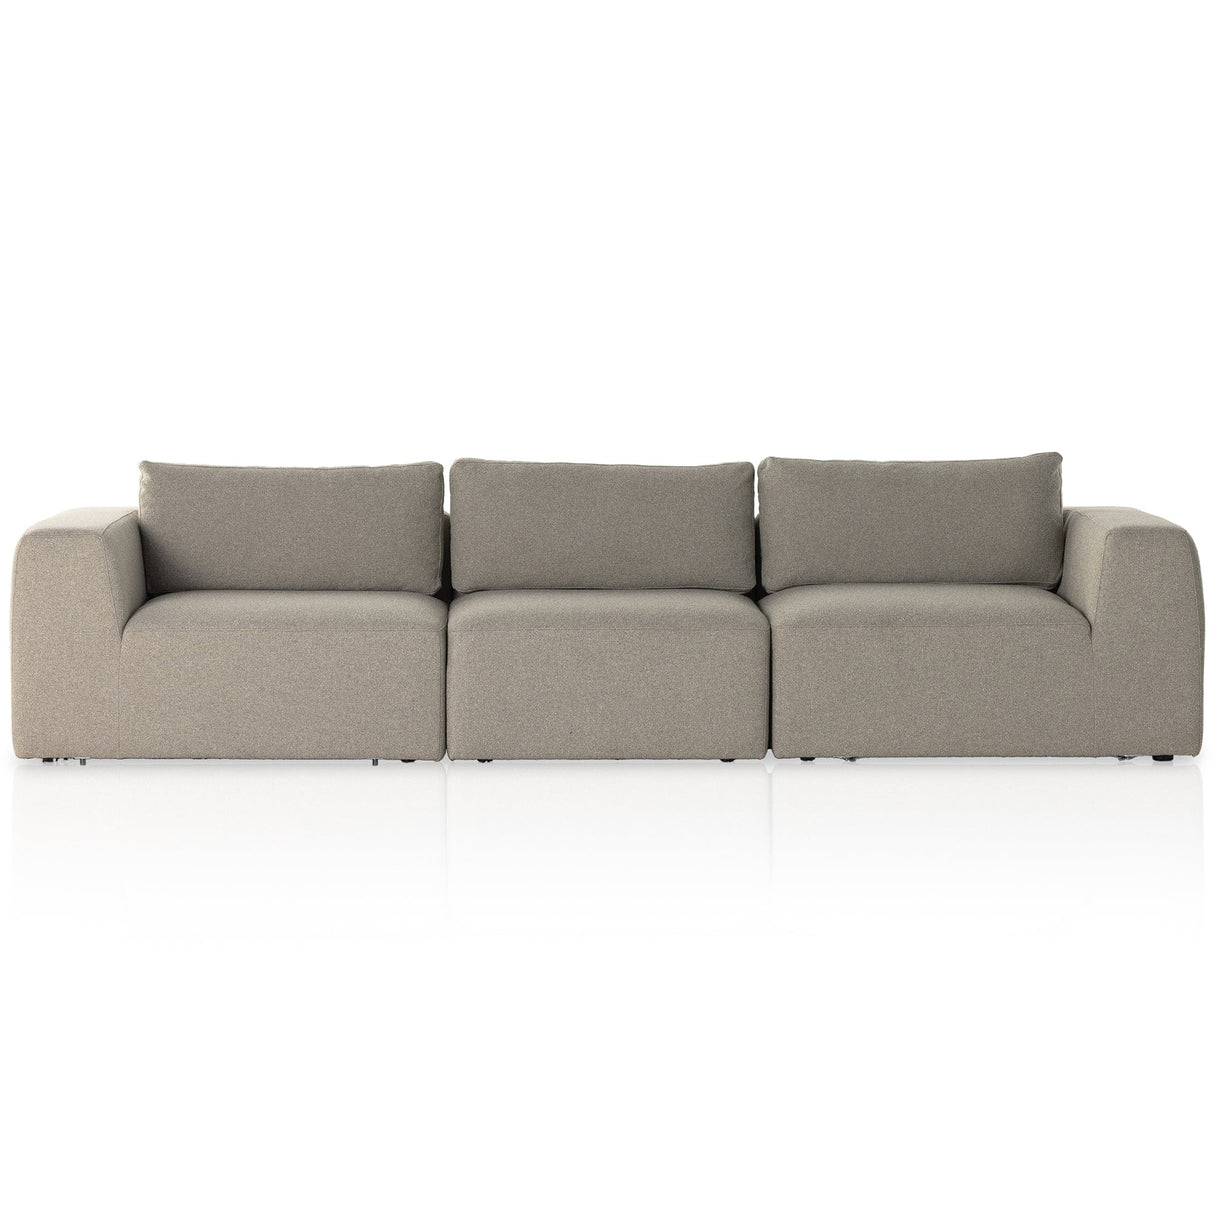 Four Hands Brylee Sofa Furniture four-hands-236300-001 801542067441